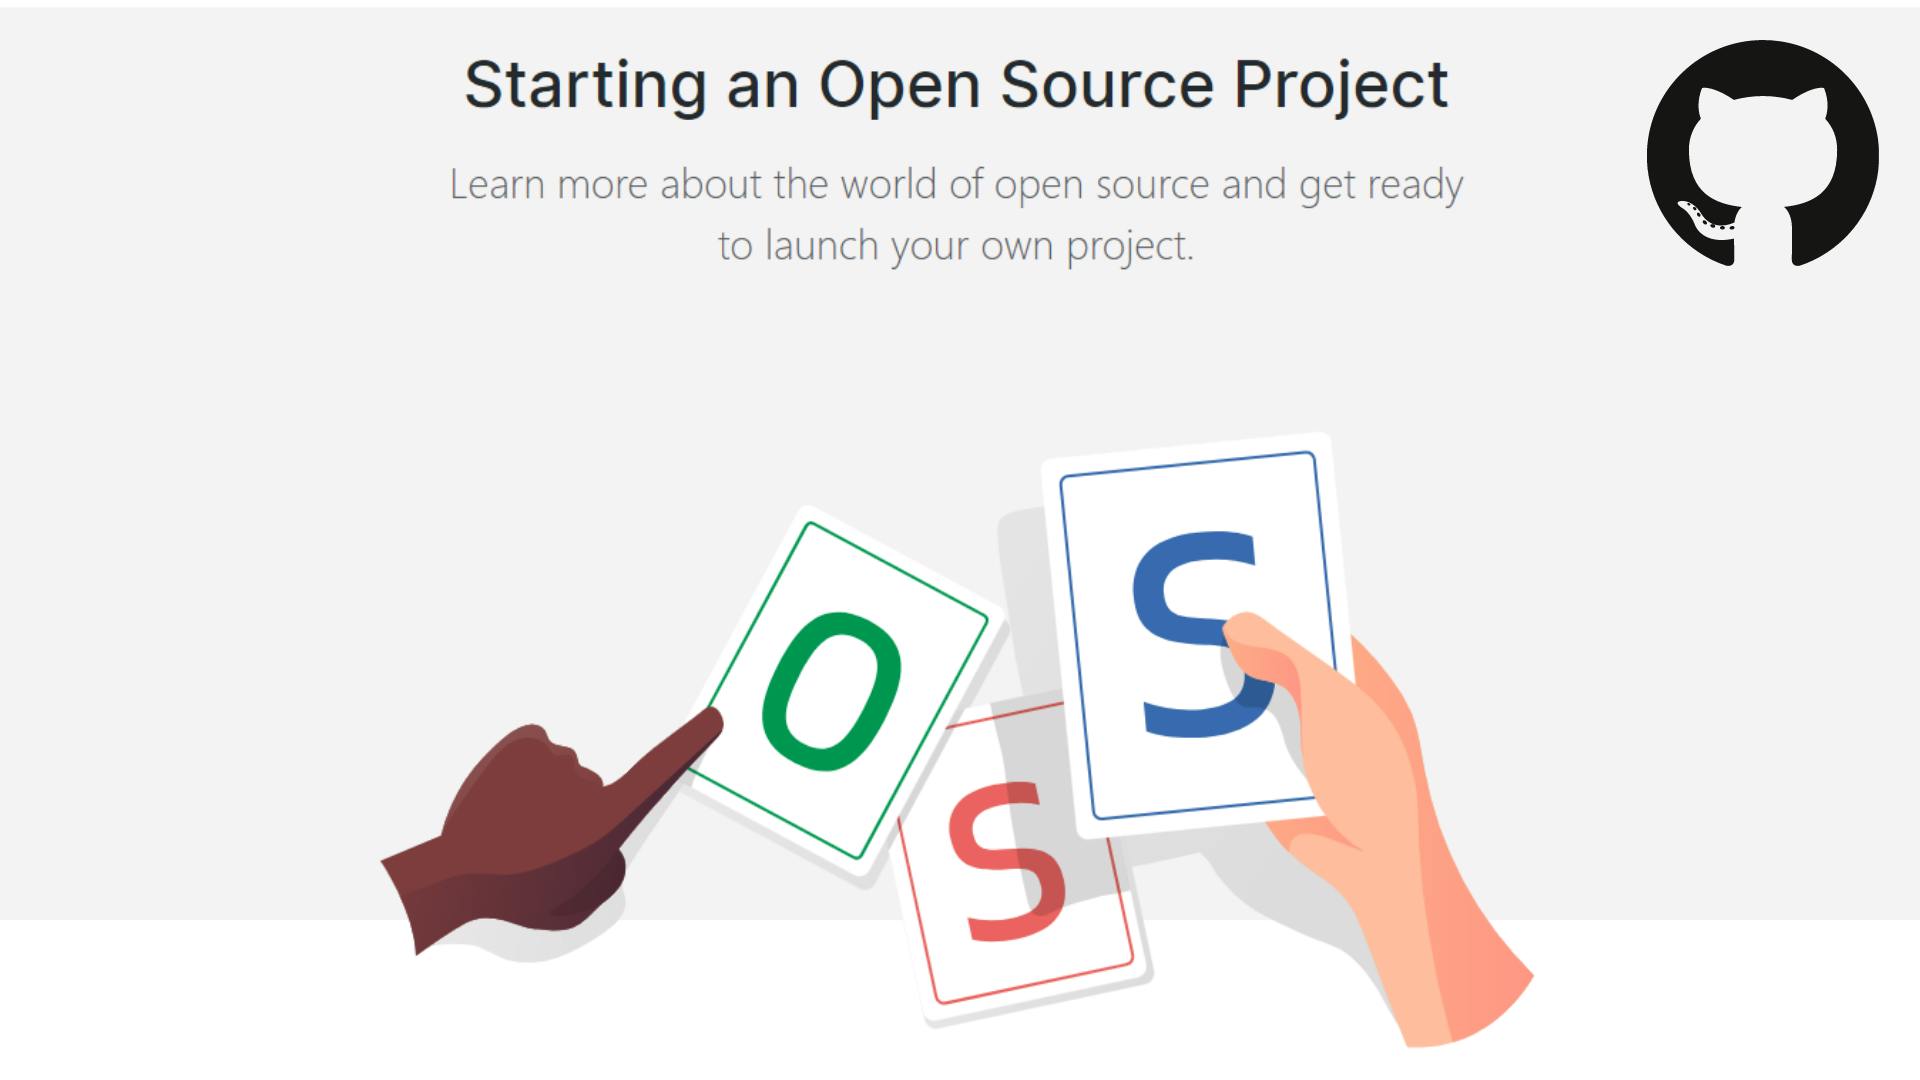 Cover image for Github's guide on starting an open source project, created by Estee